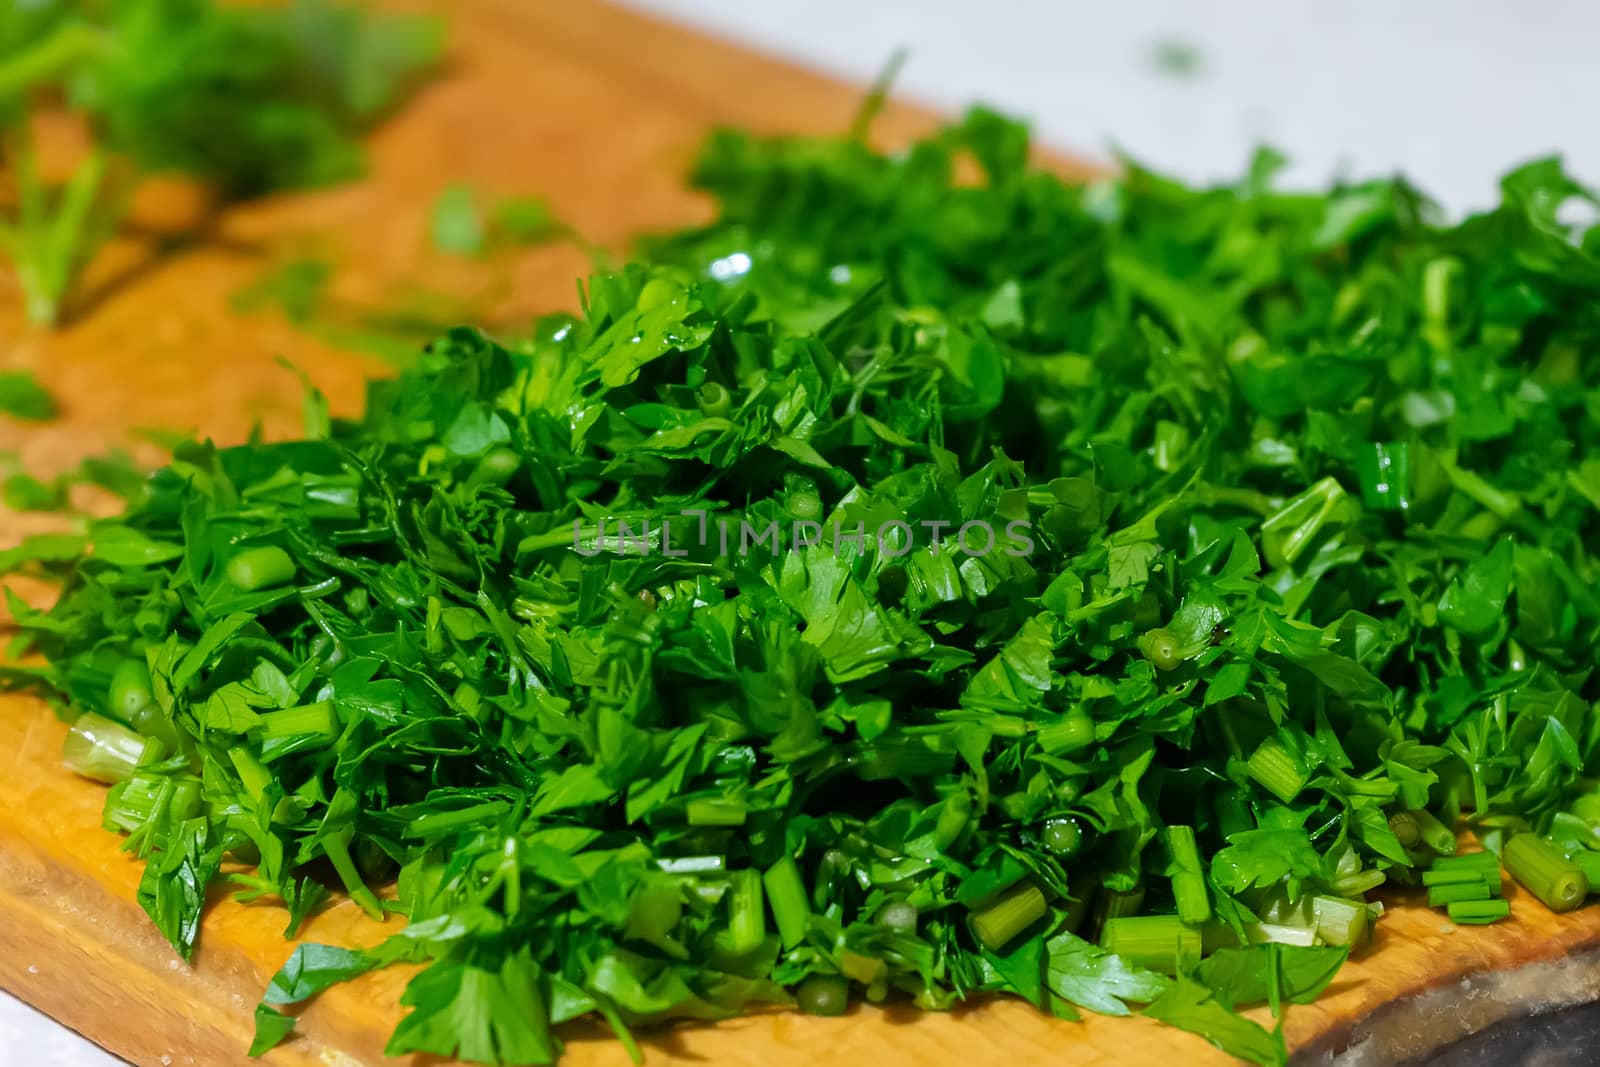 parsley greens finely chopped with a knife on a wooden board